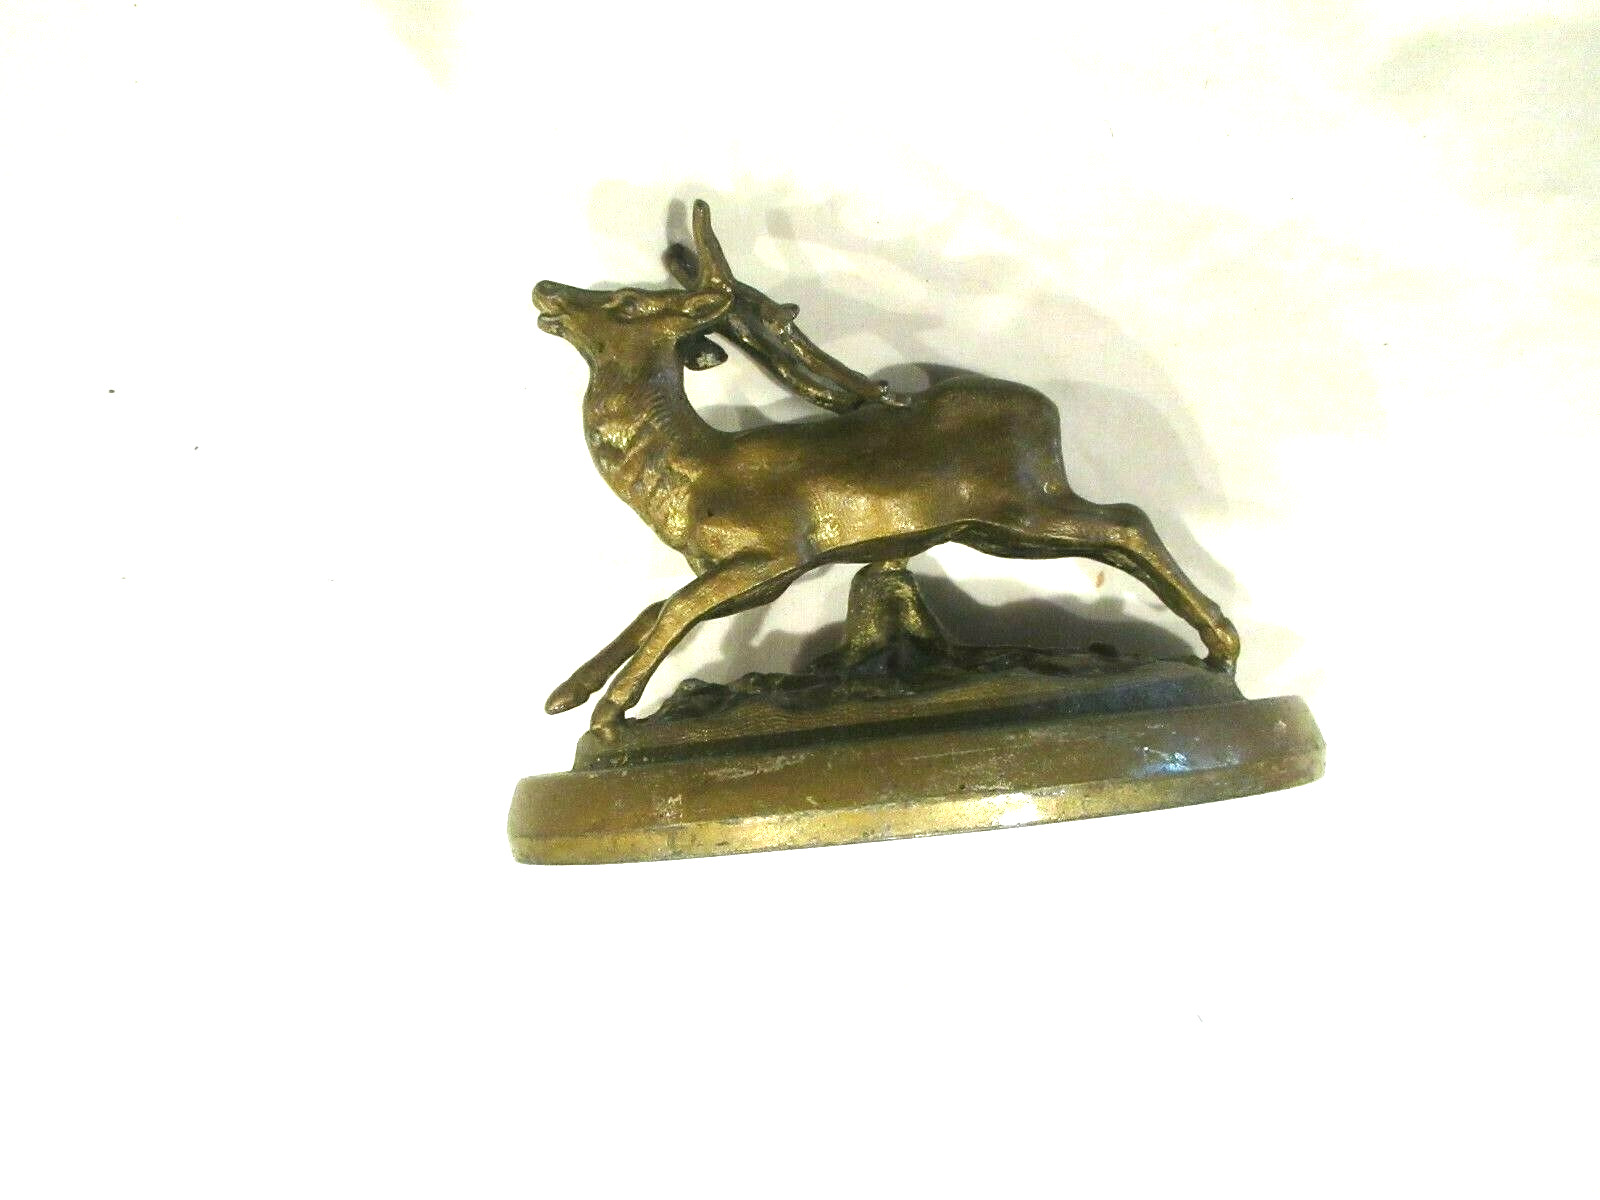 Middletown Plate Co. Stag figure statue, antique